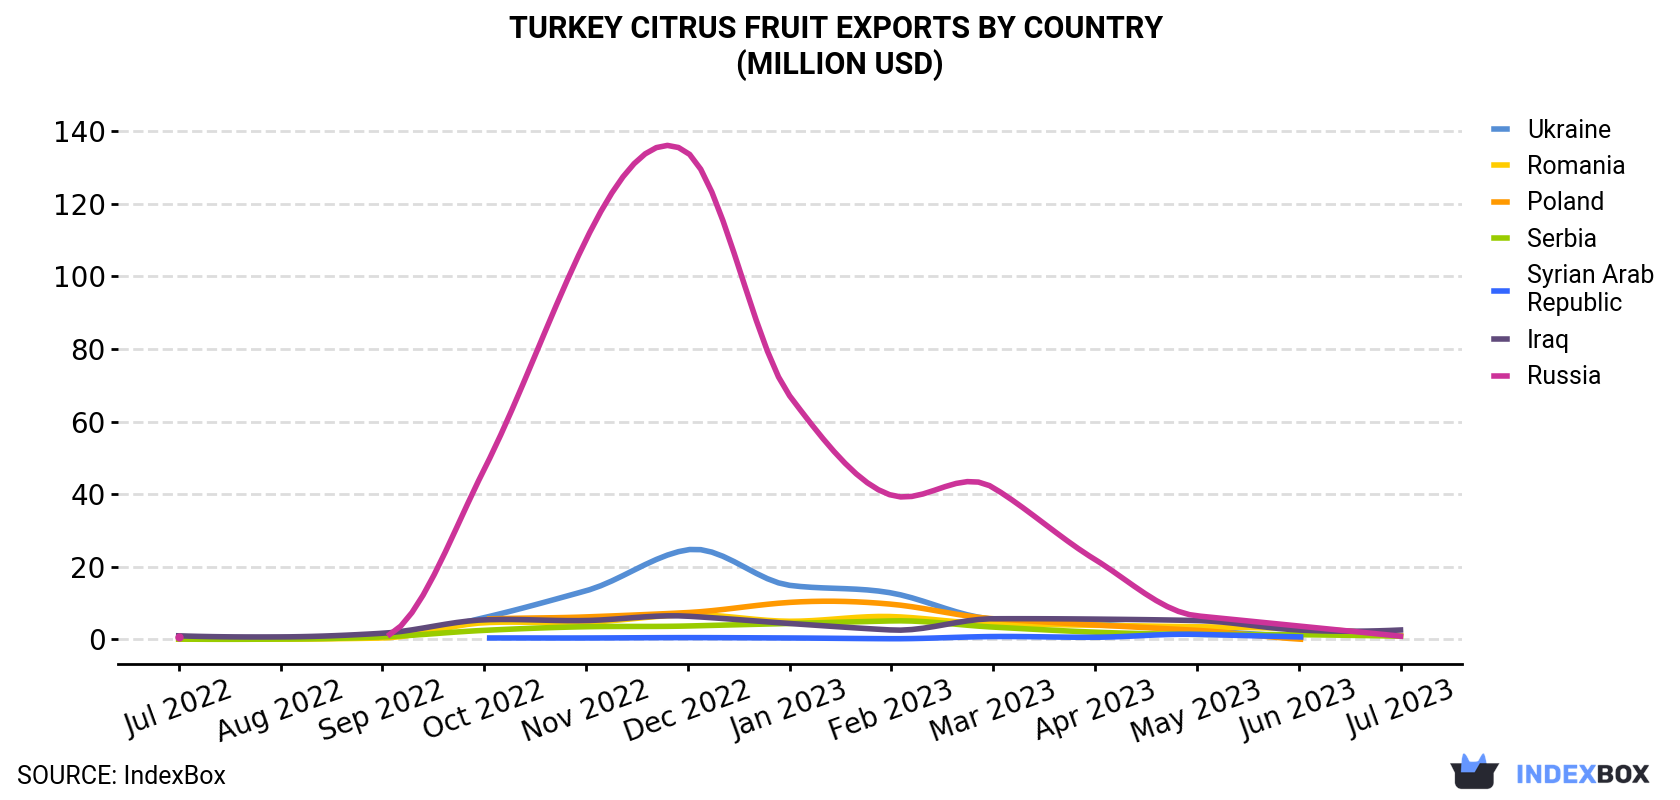 Turkey Citrus Fruit Exports By Country (Million USD)